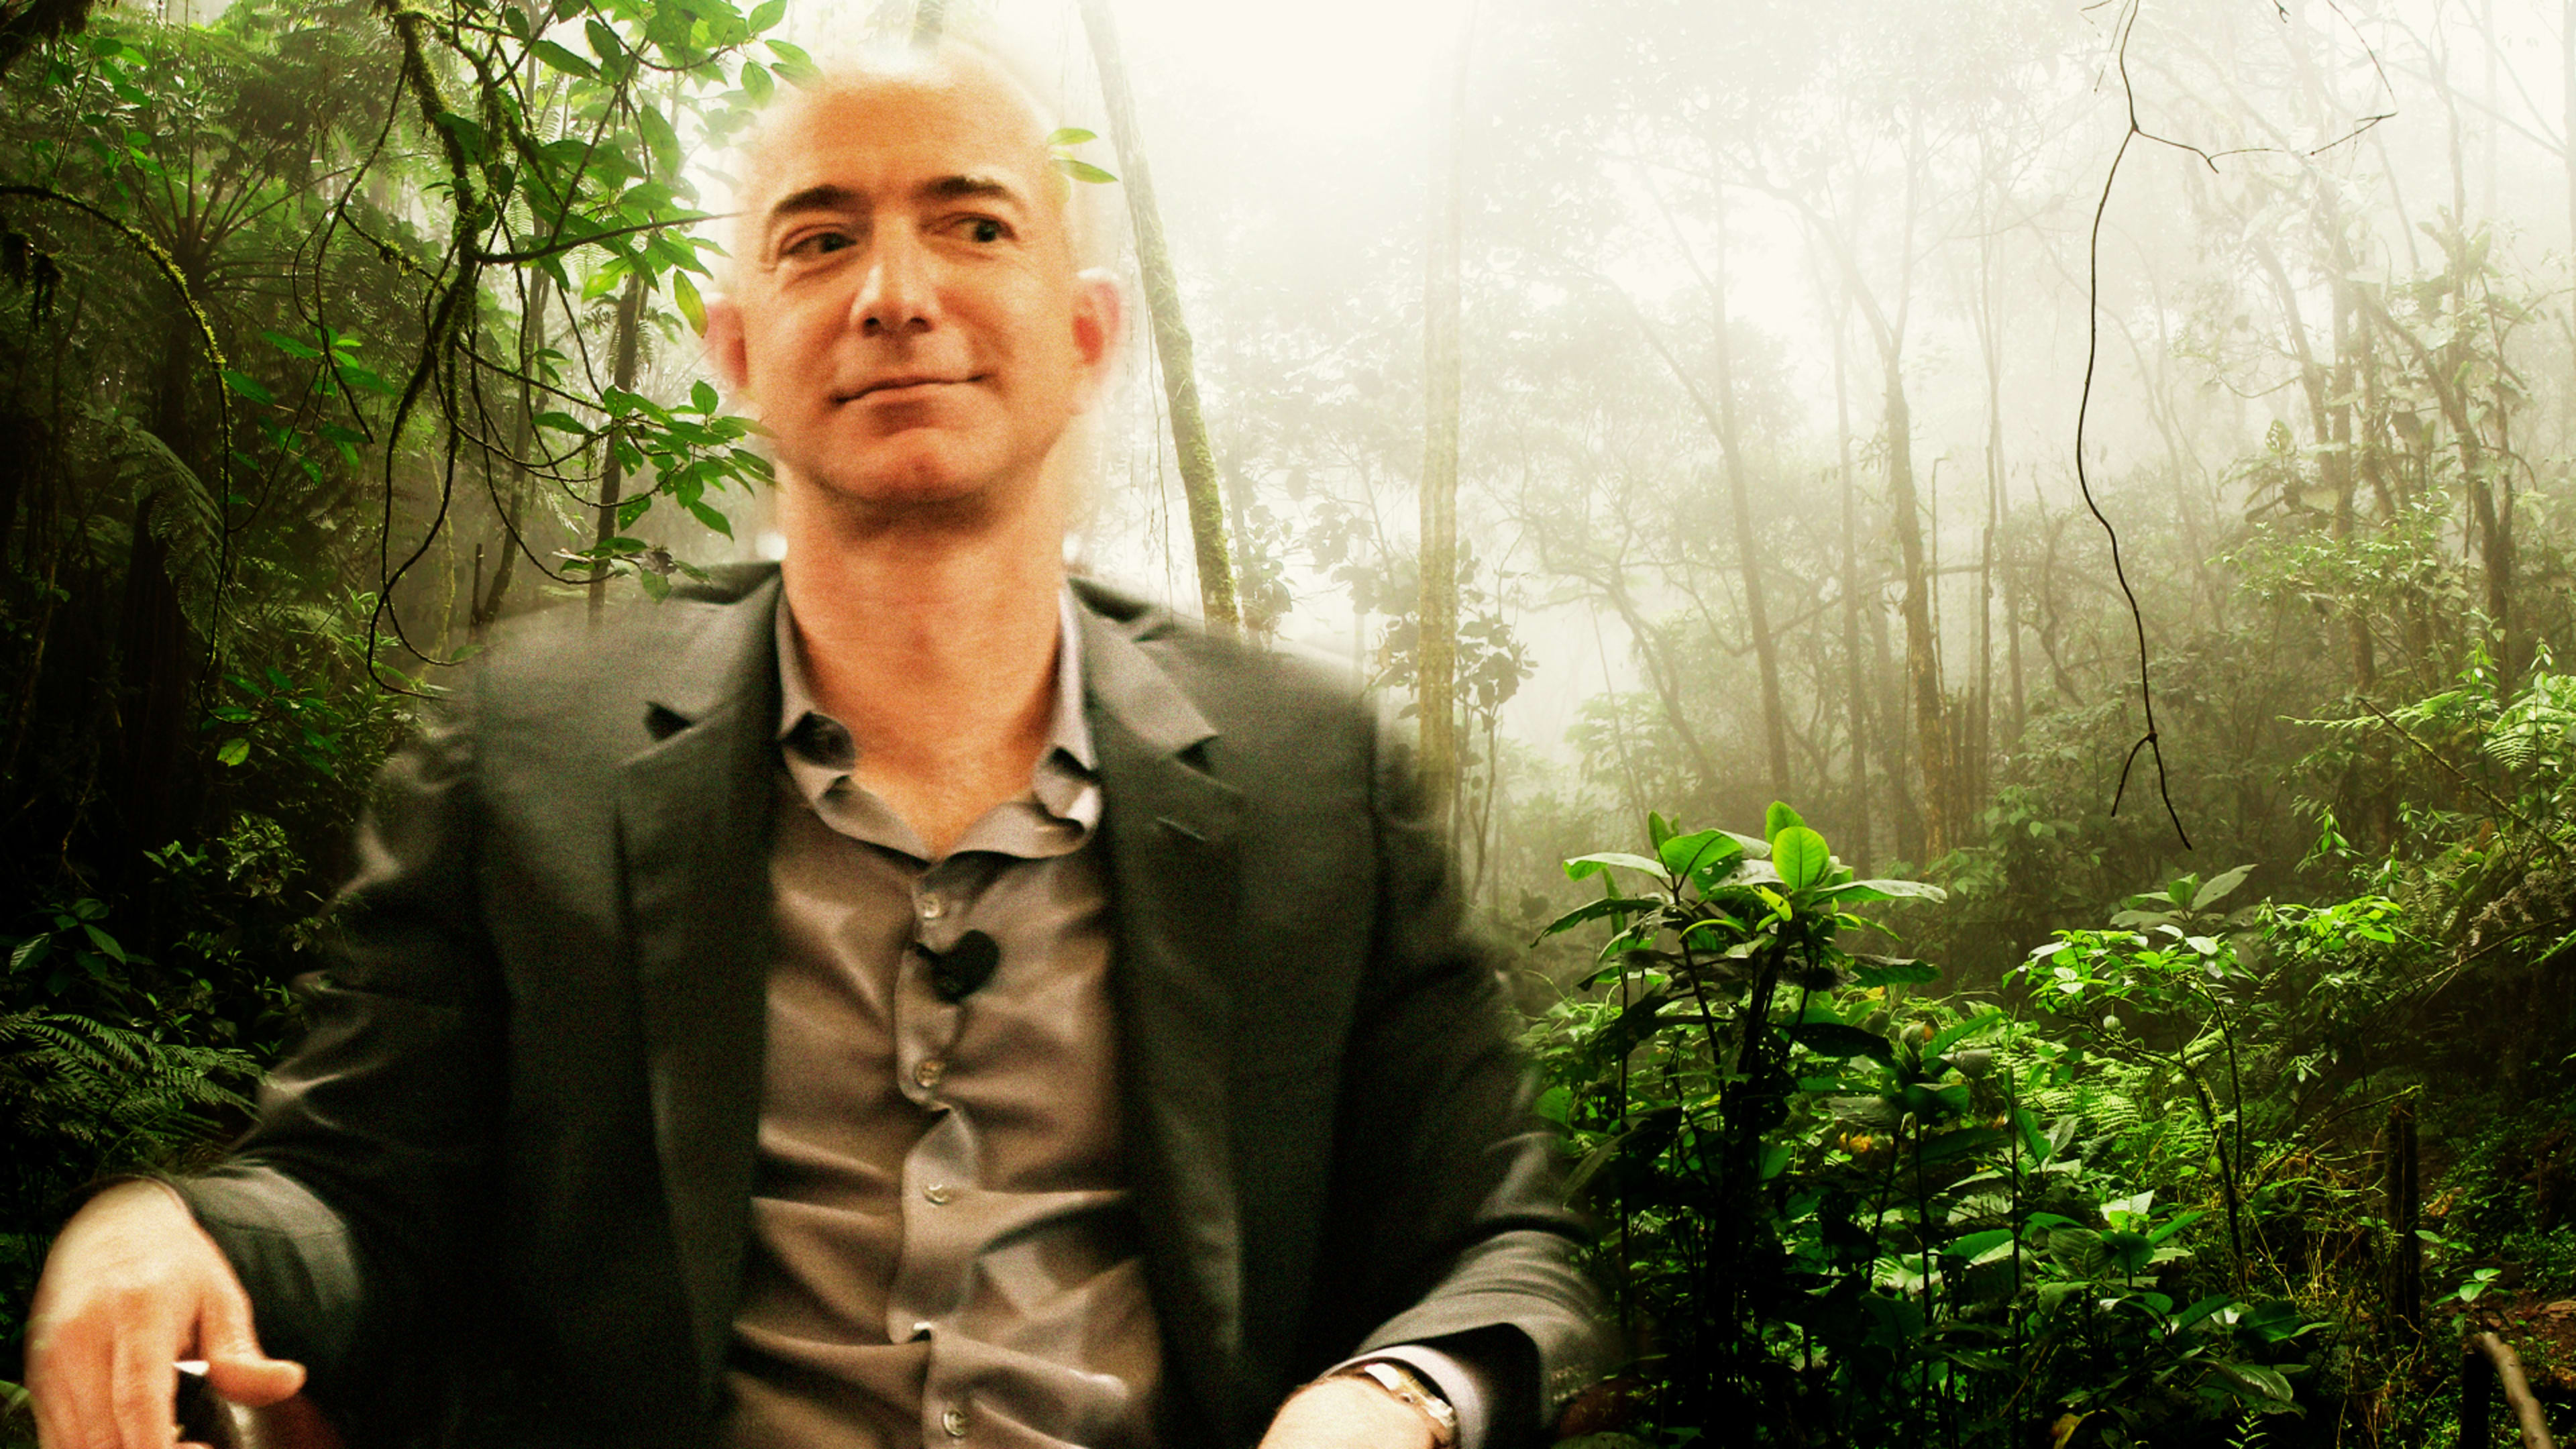 Now’s your chance to tell ICANN how you feel about Amazon’s domain battle with the rain forest